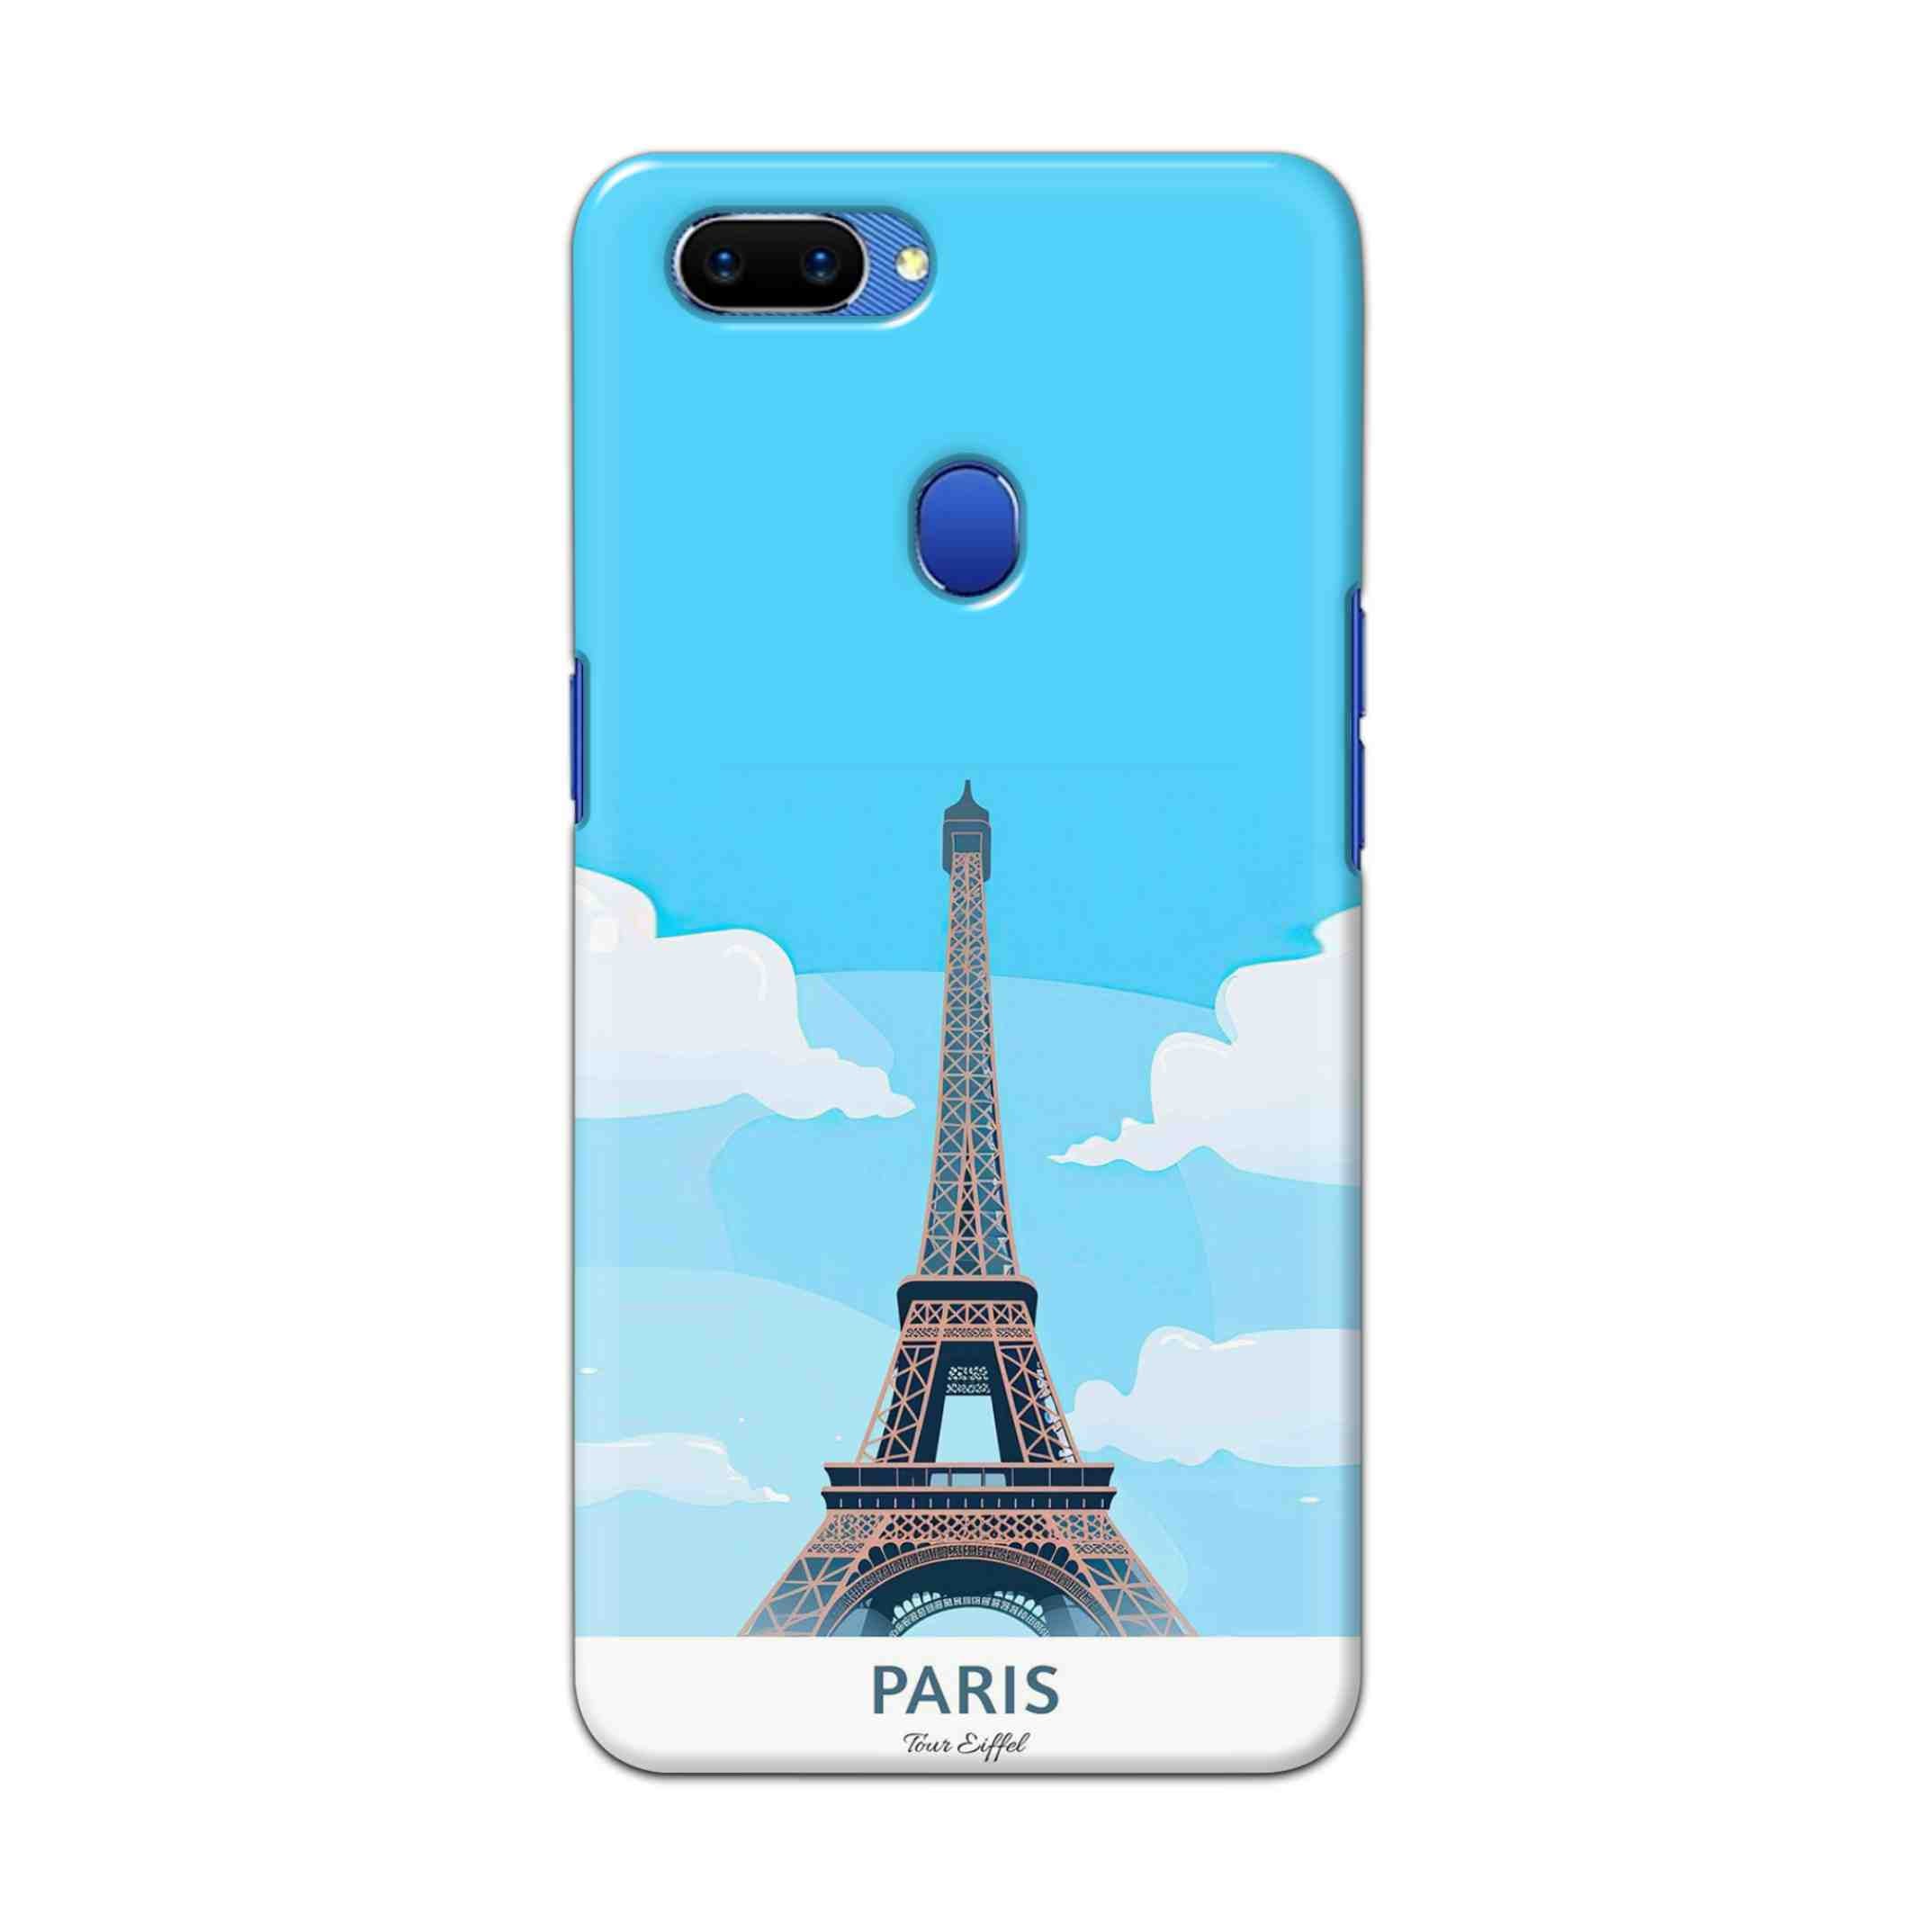 Buy Paris Hard Back Mobile Phone Case Cover For Oppo A5 Online